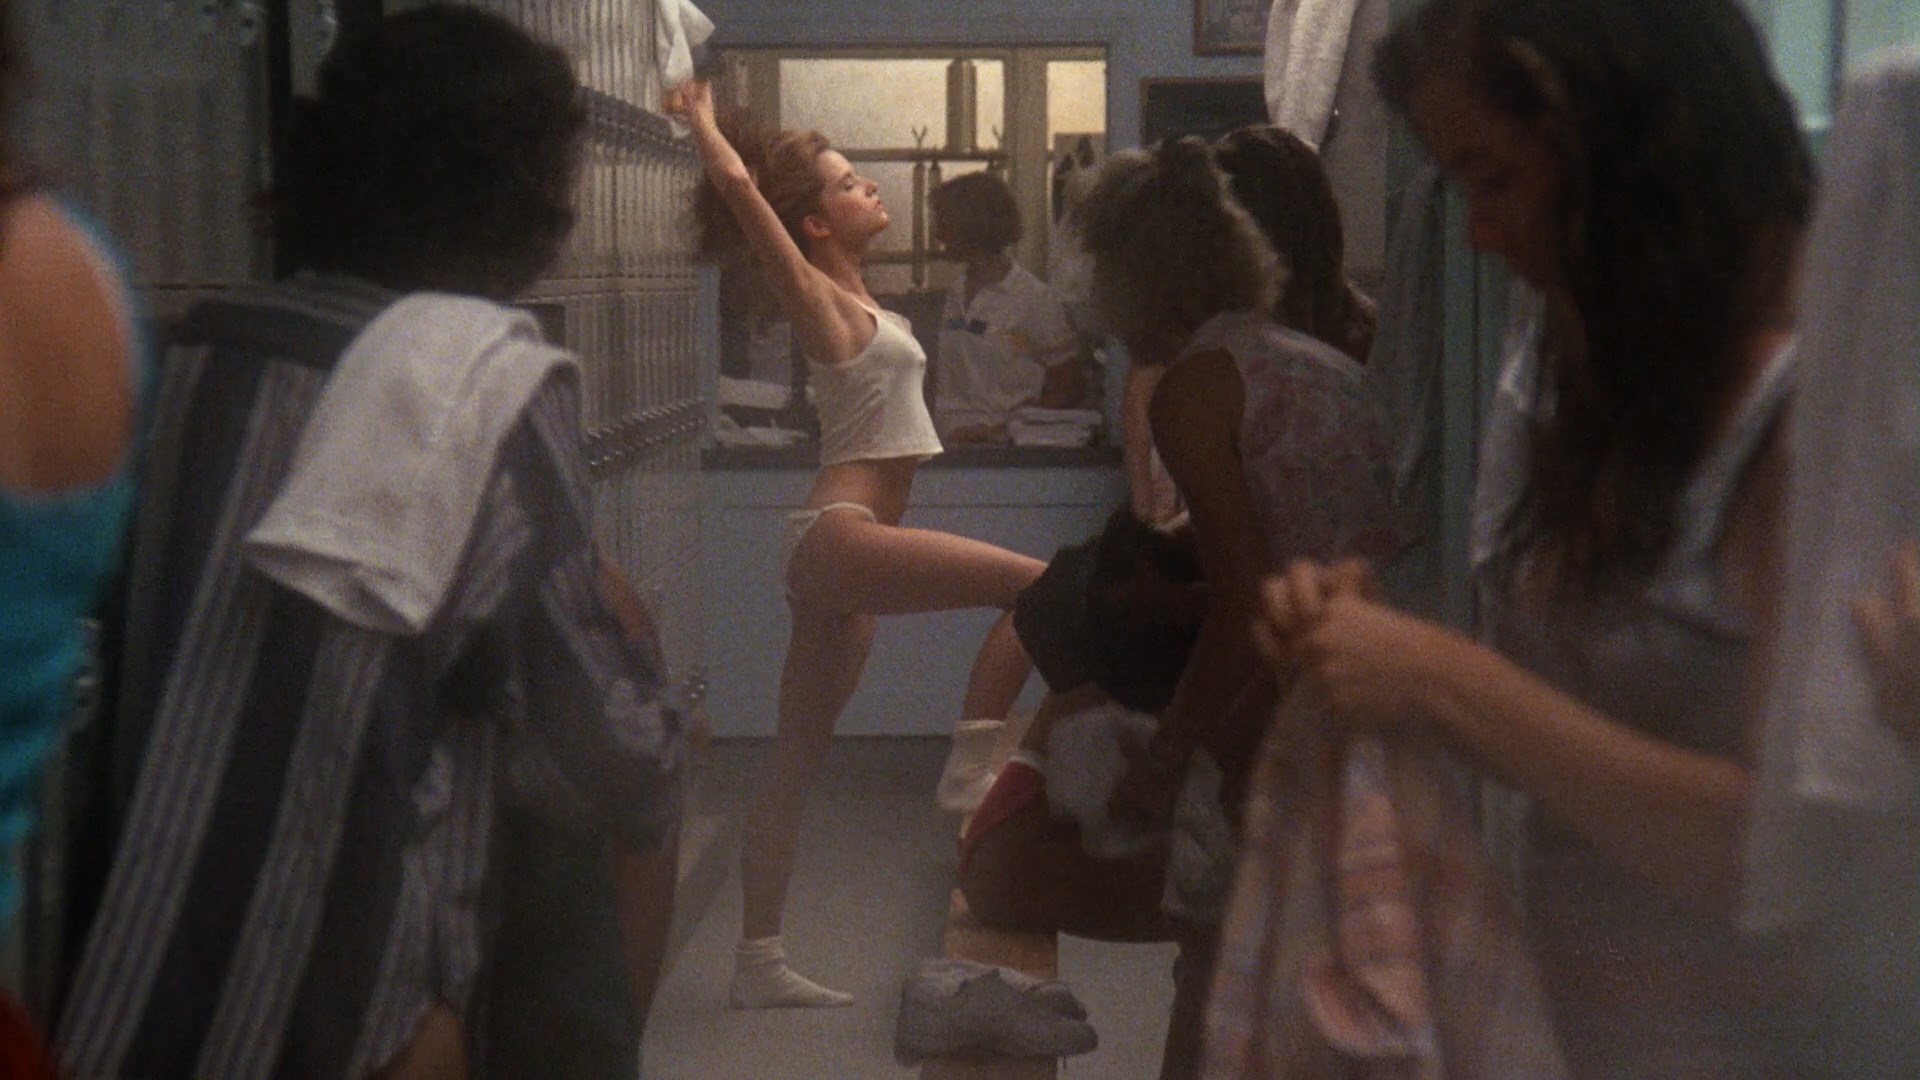 Lea Thompson looks extremely sexxxy when she is getting ready at a locker r...